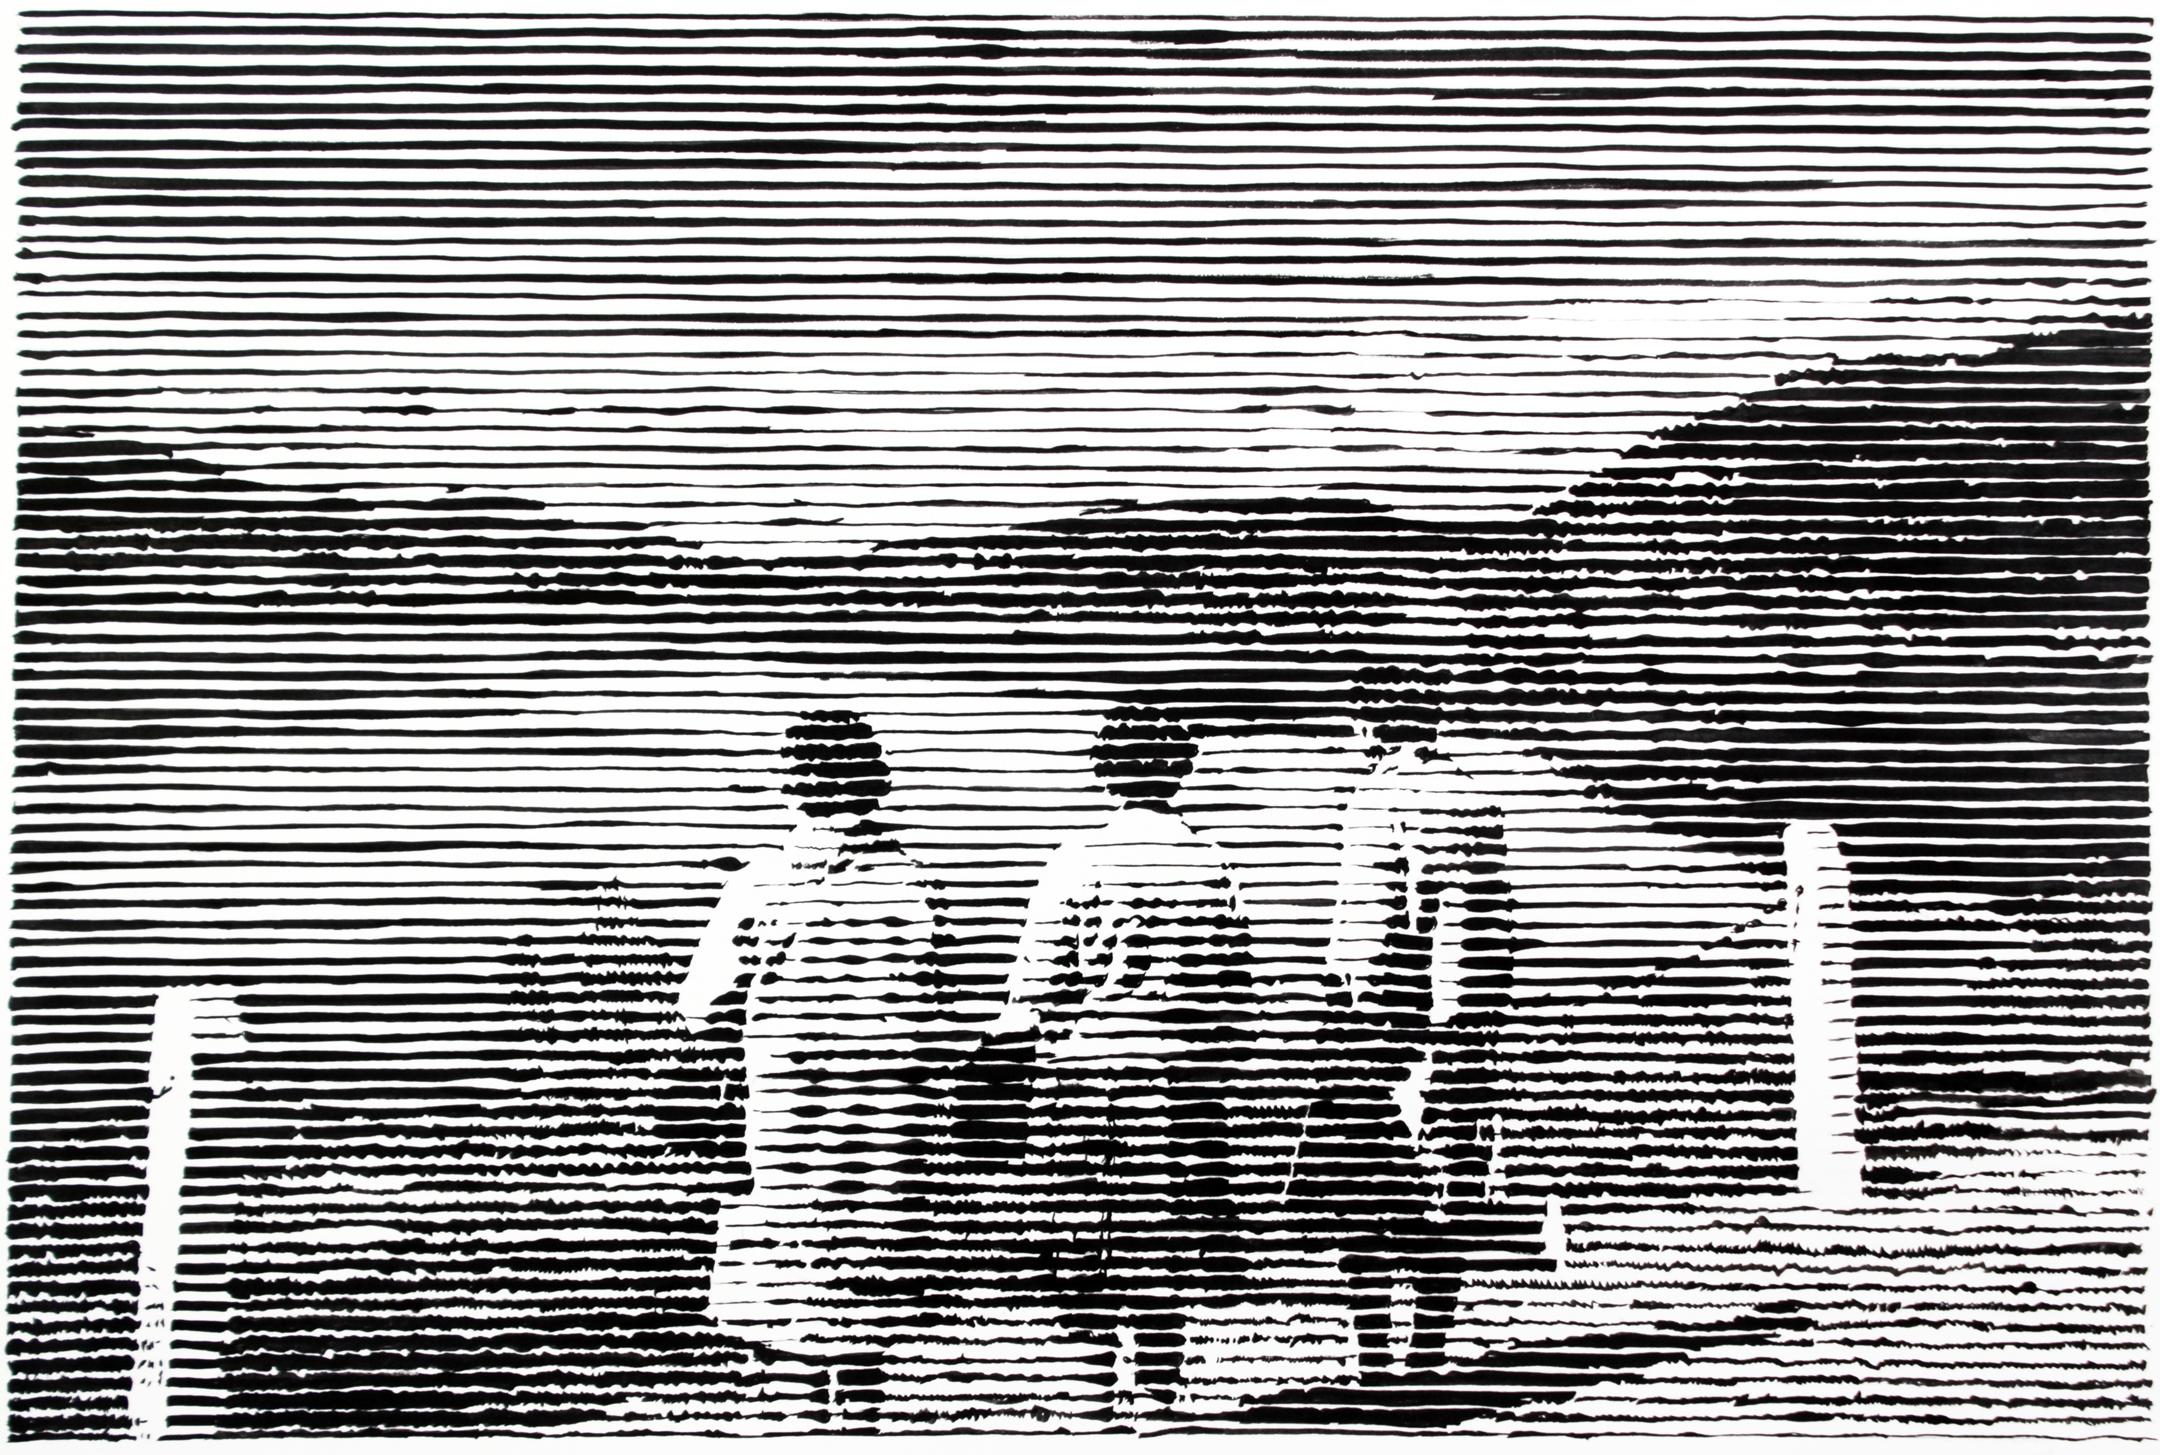 Three Women, black and white work on paper, landscape